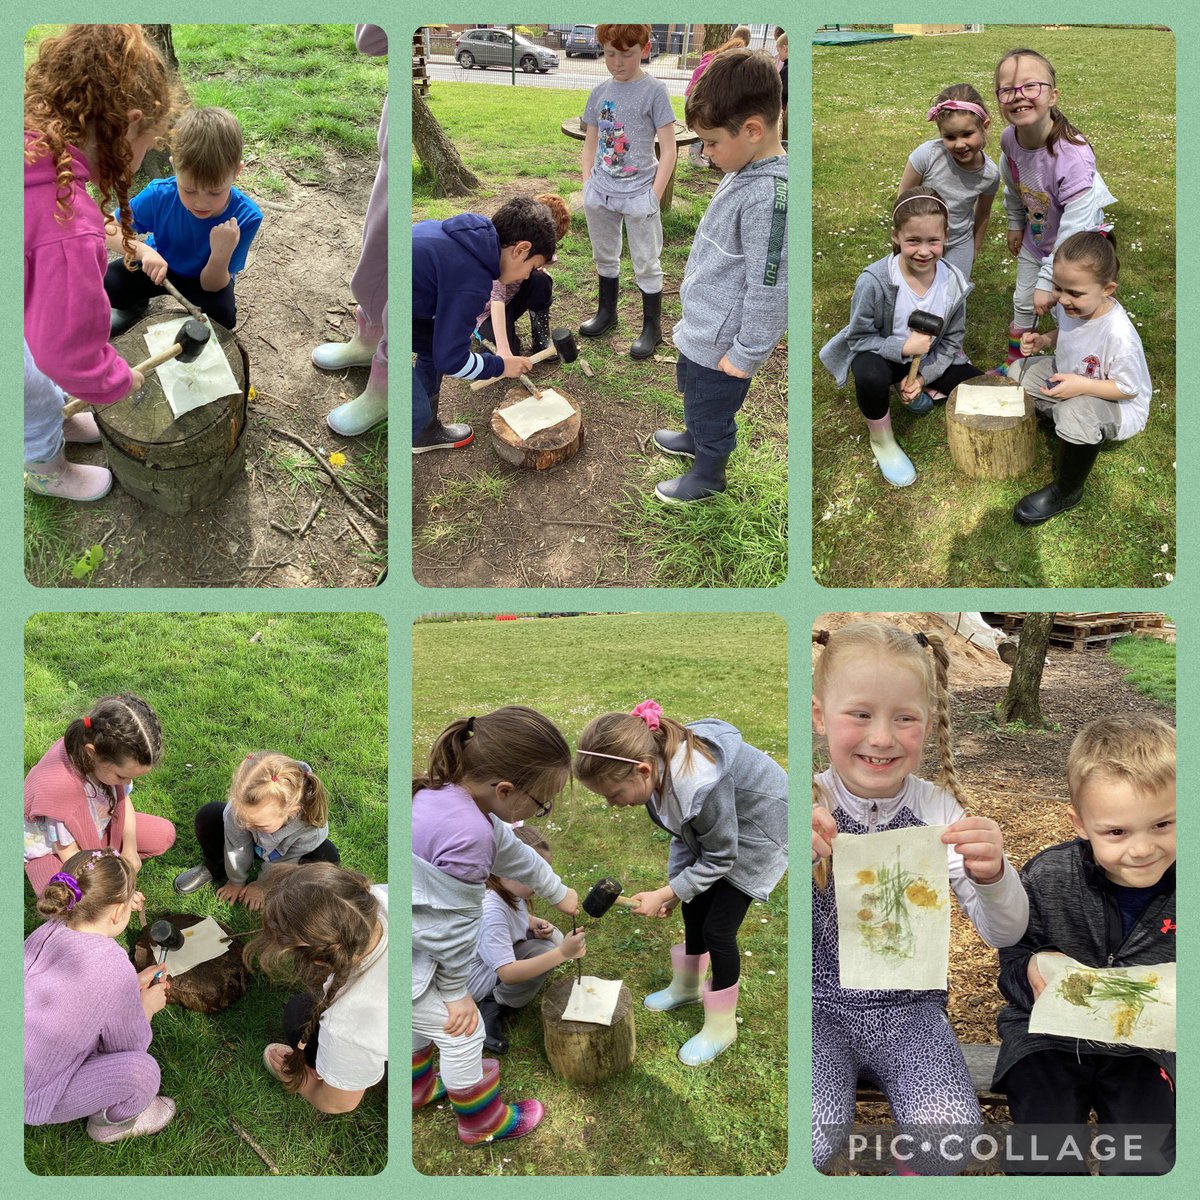 Year 2 had a great forest school session with @Littfoothq. The children worked together to create natural prints while also practicing their knot tying skills. #ForestSchool #outdoorlearning #RPEnrichment